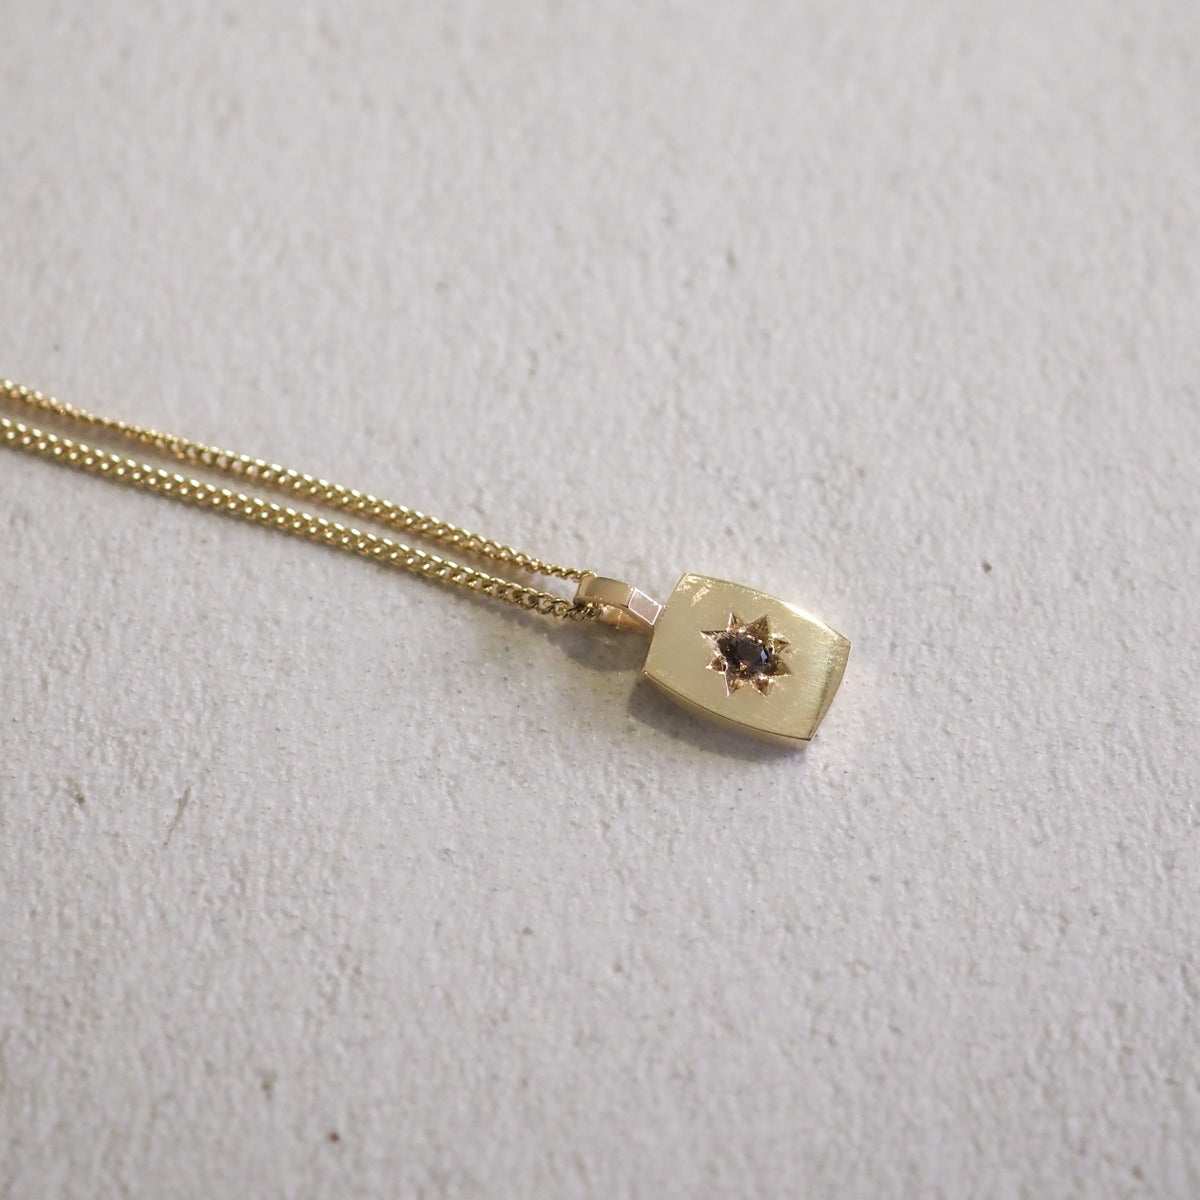 Archive — Archetype Necklace | The Traveller